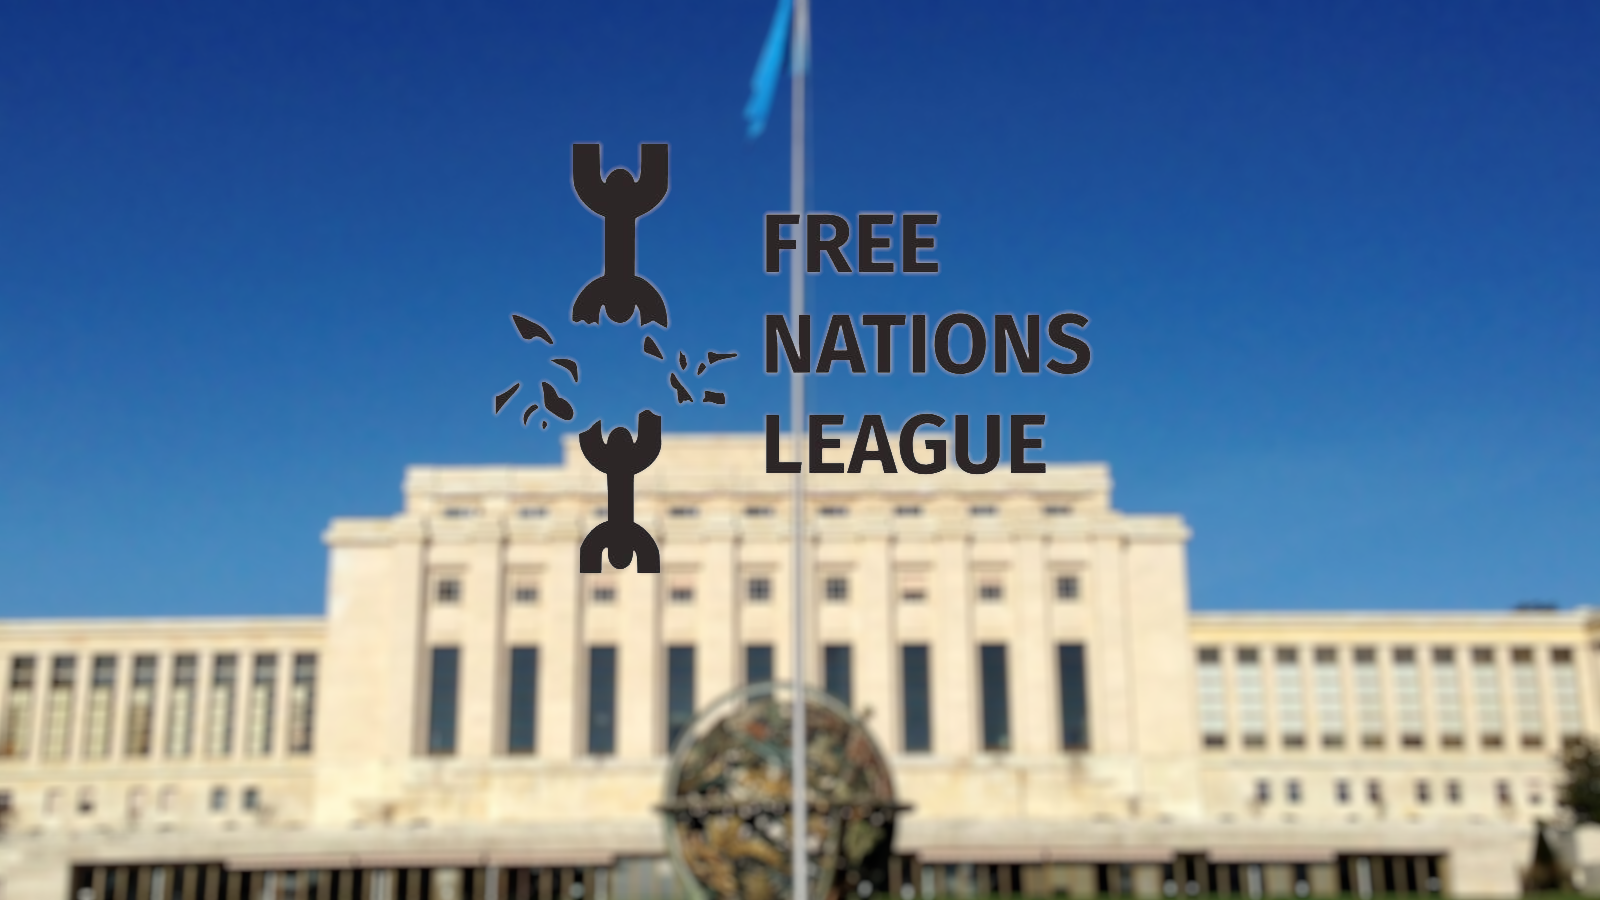 “This aligns with the indicators of genocide”, the League of Free Nations has appealed the United Nations Human Rights Council